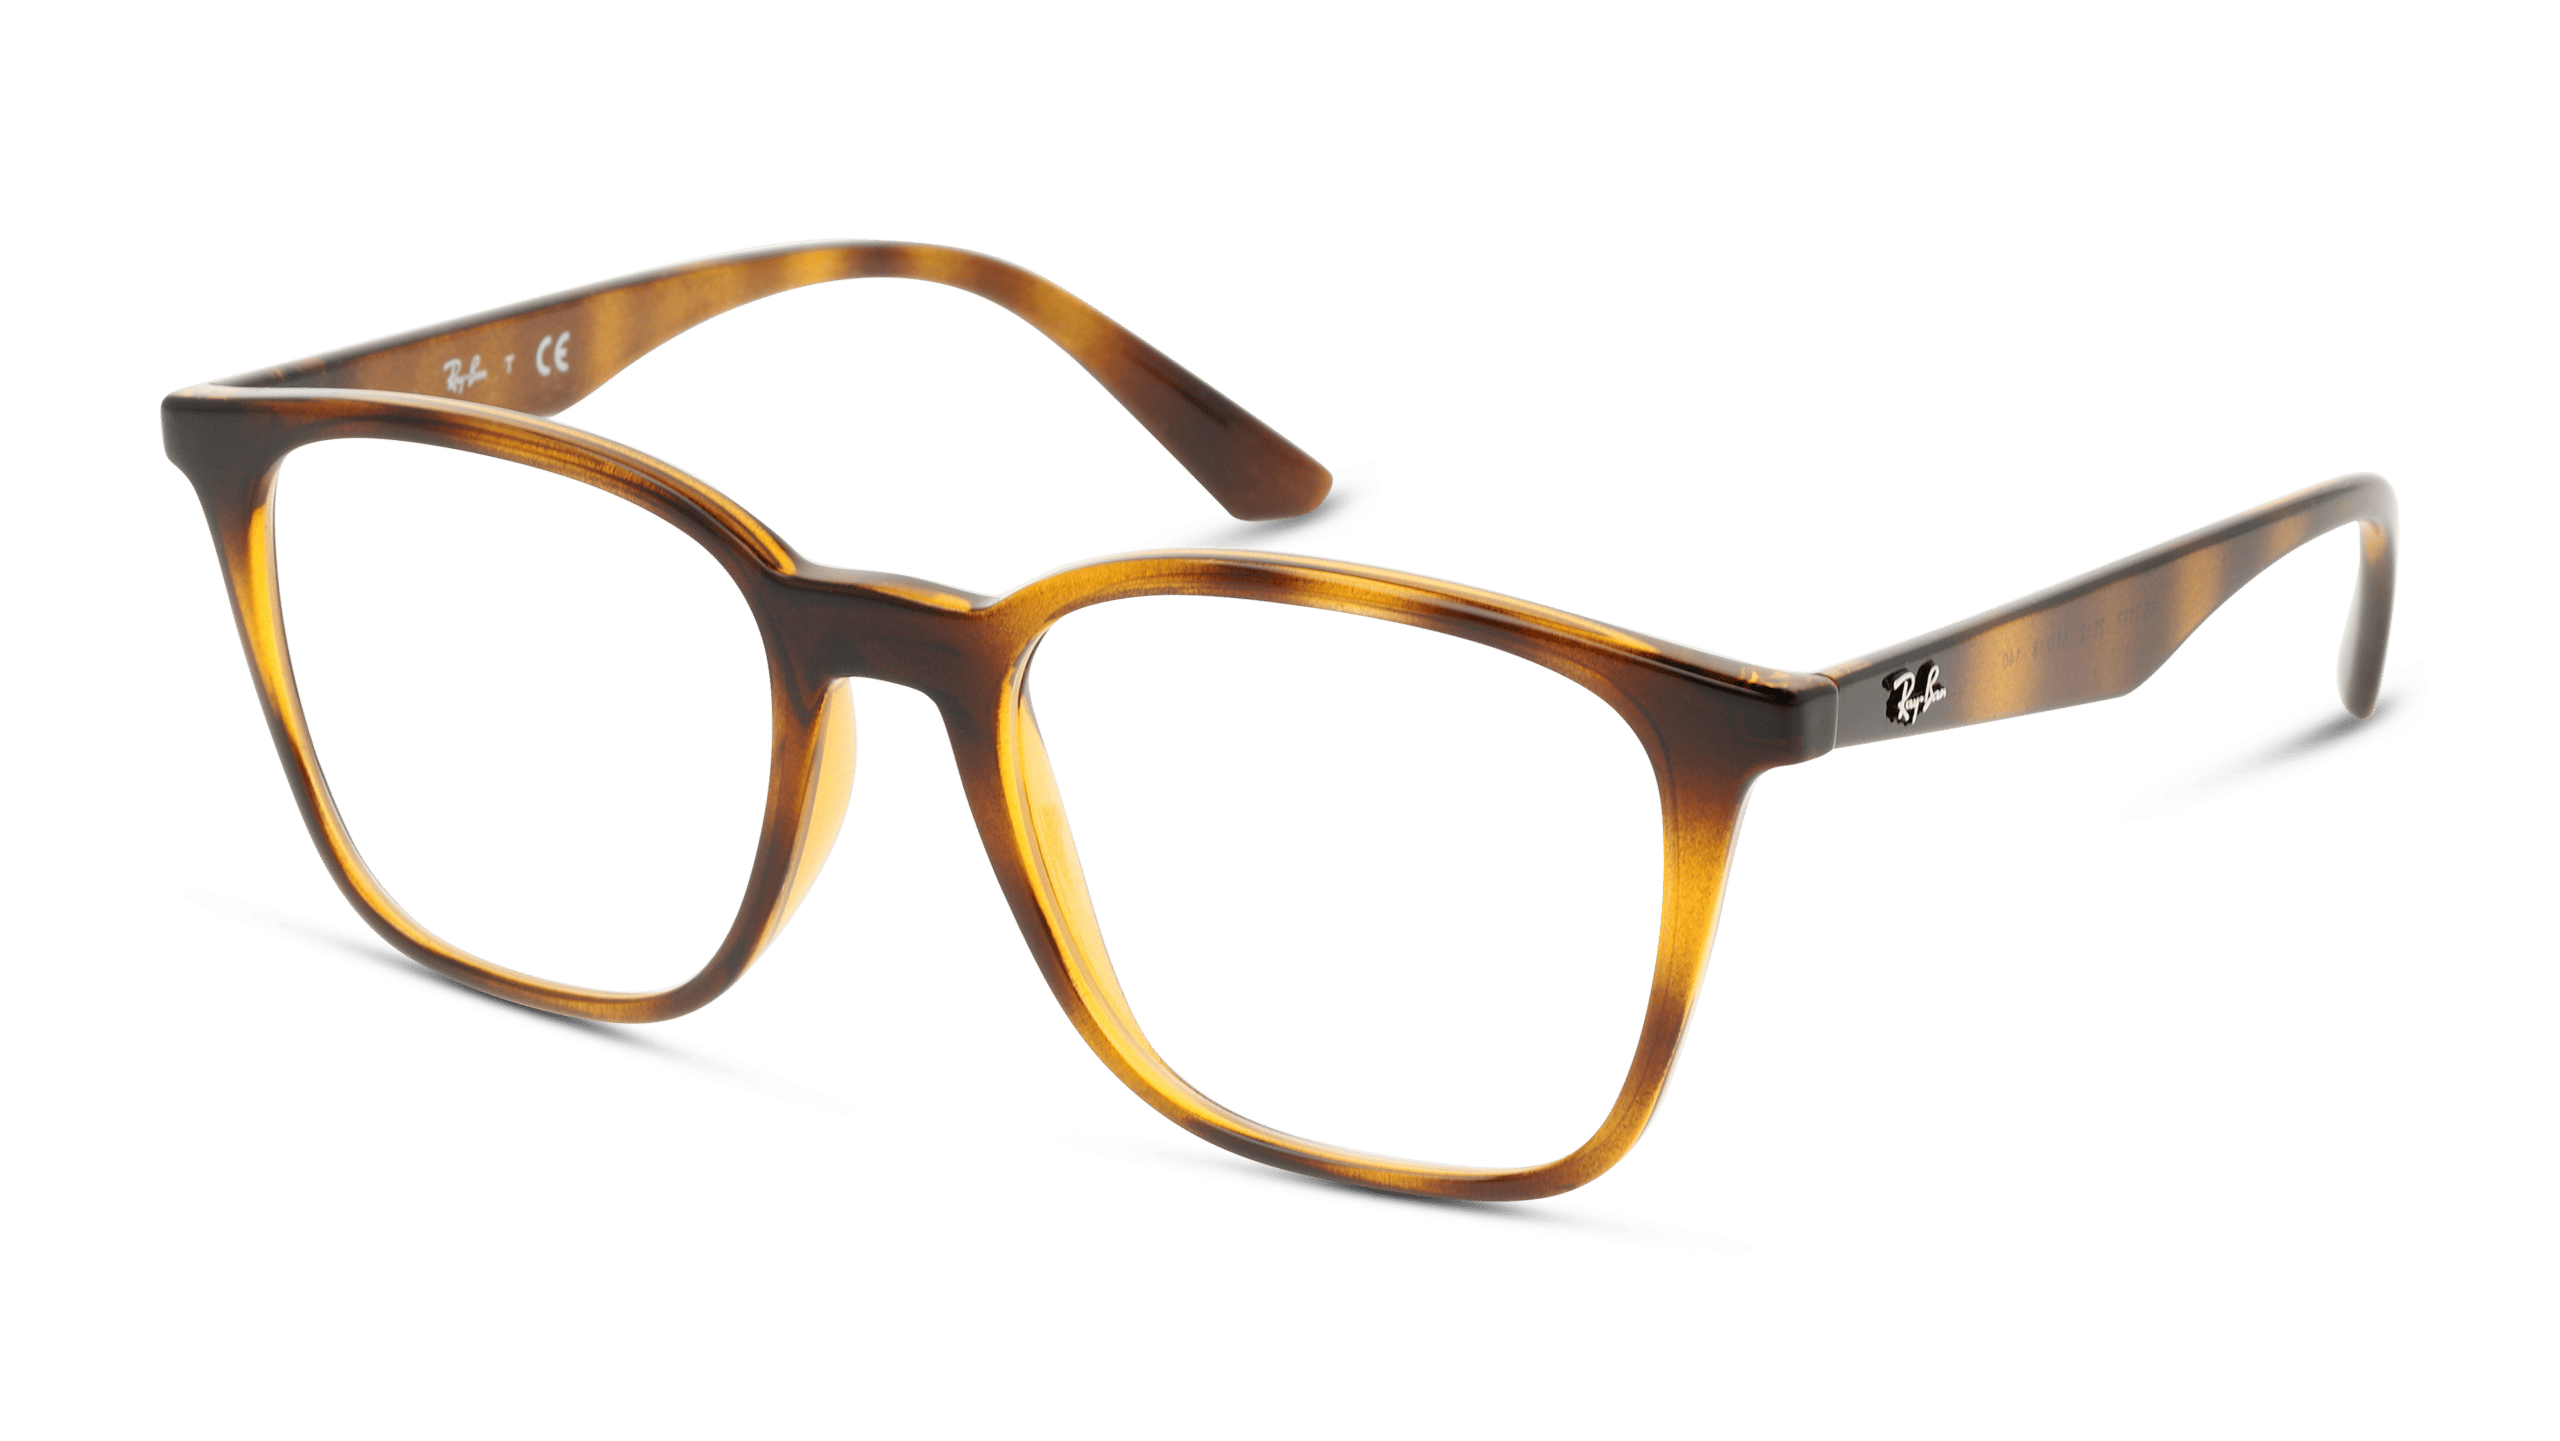 RX7177 men's eyeglasses in square shape from Ray-Ban from top-rated acetate